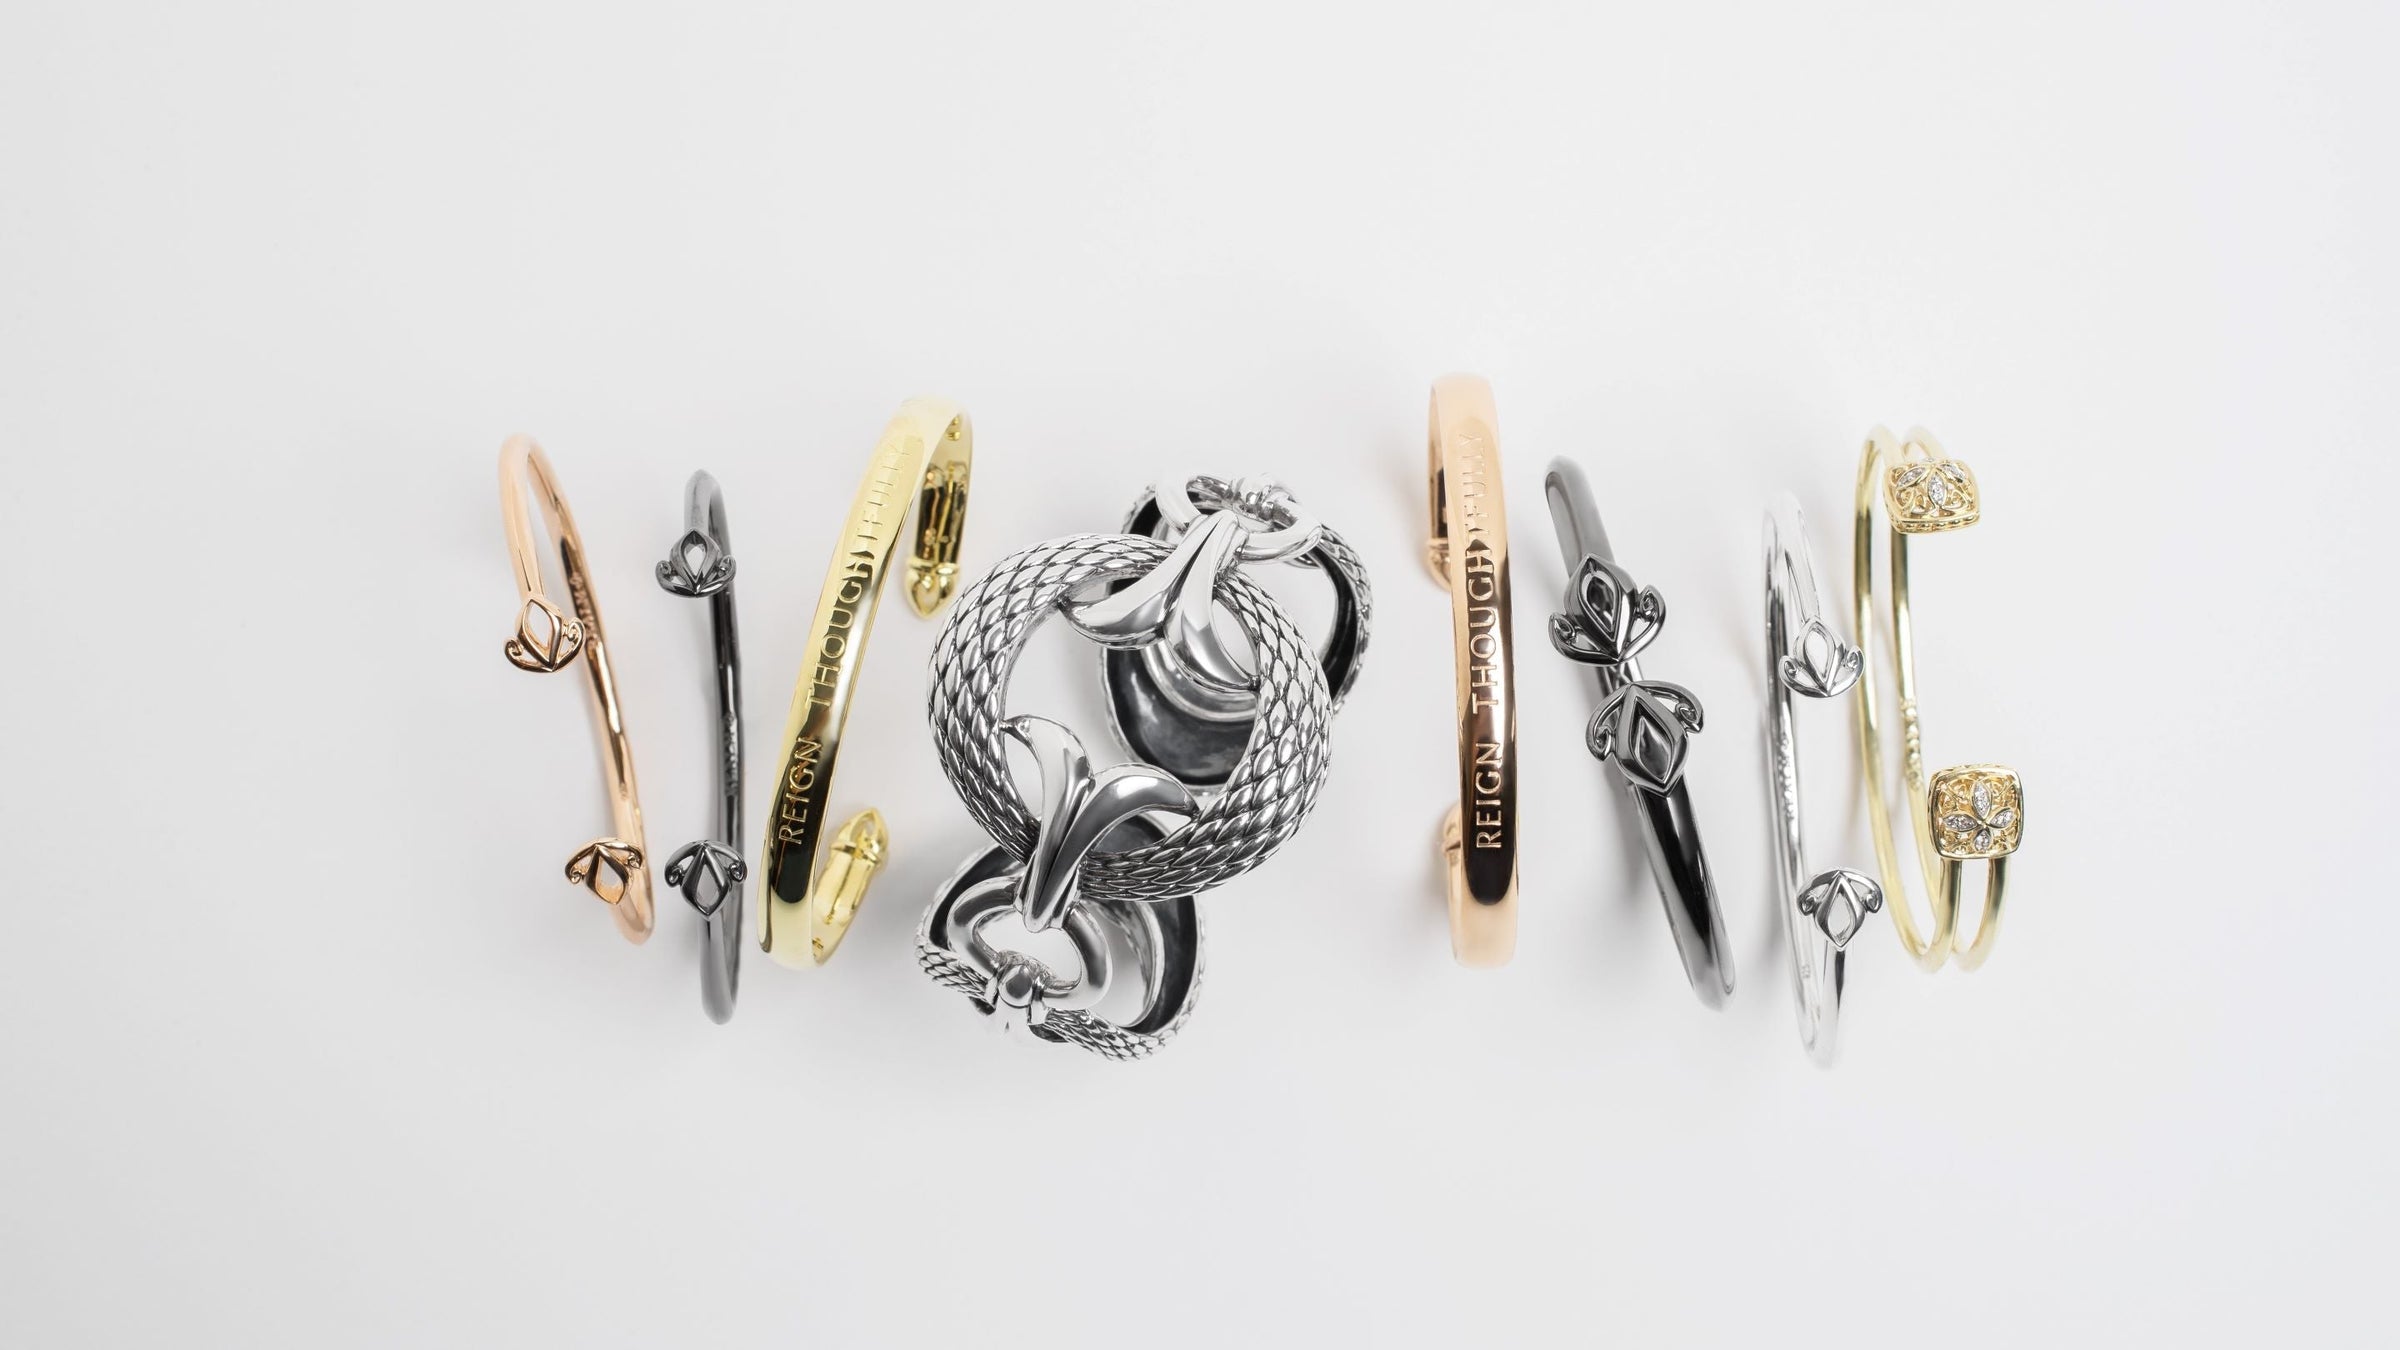 Delicate to daring styles of gold, silver, rose gold bracelets from REALM